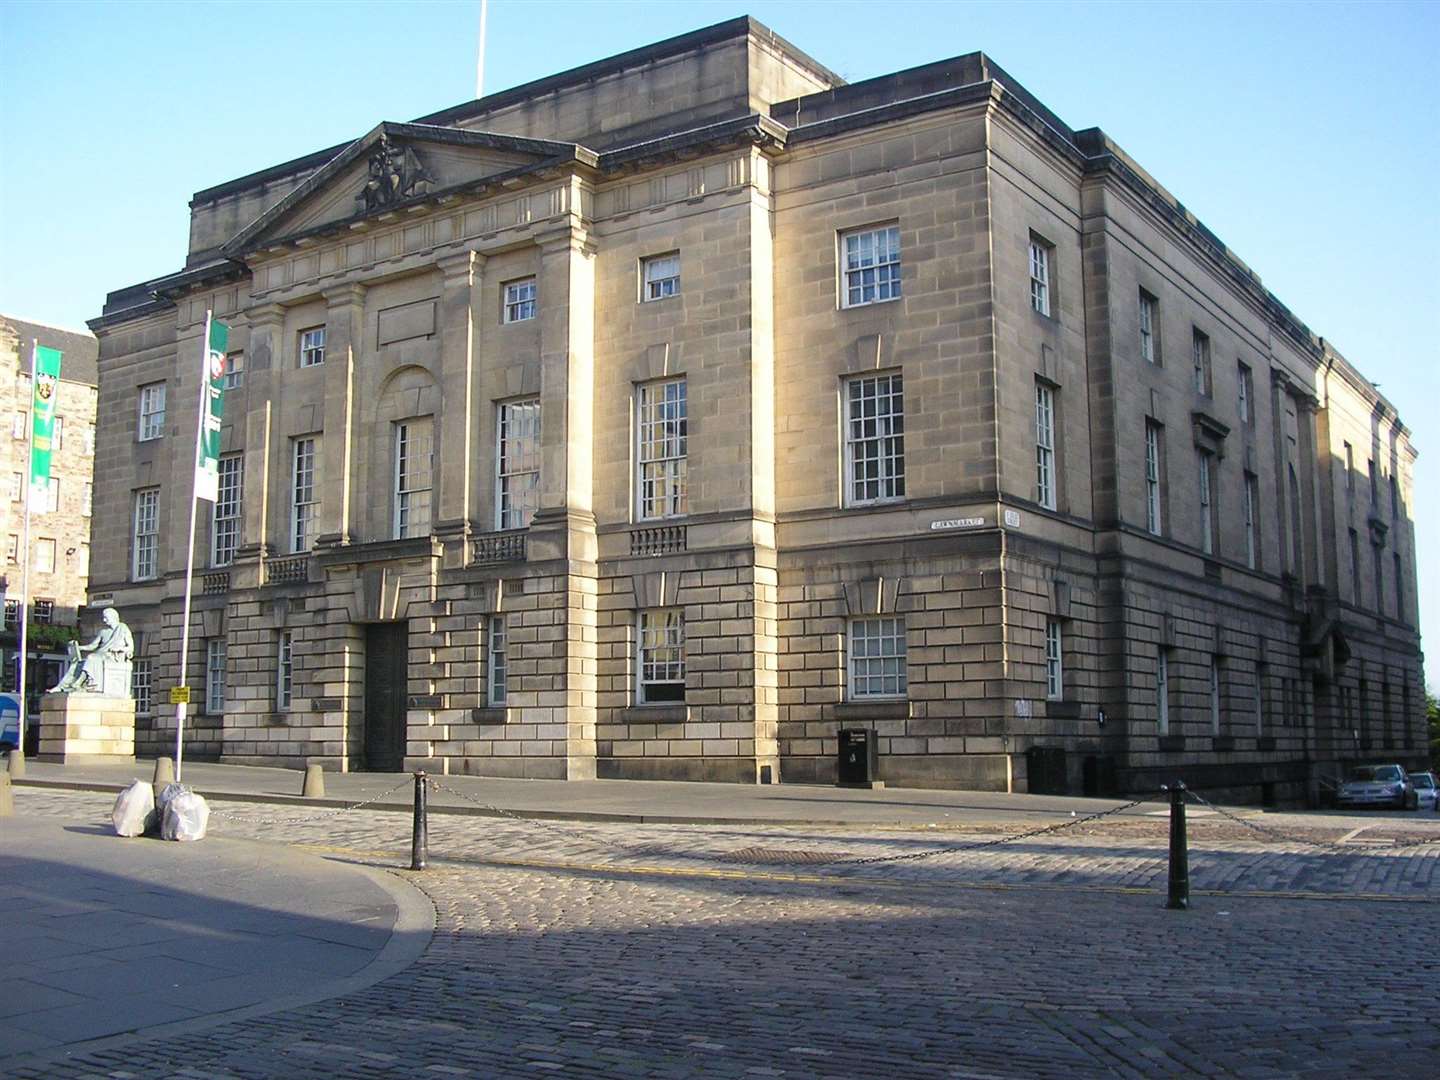 The High Court in Edinburgh saw the conviction of Alistair Greig.